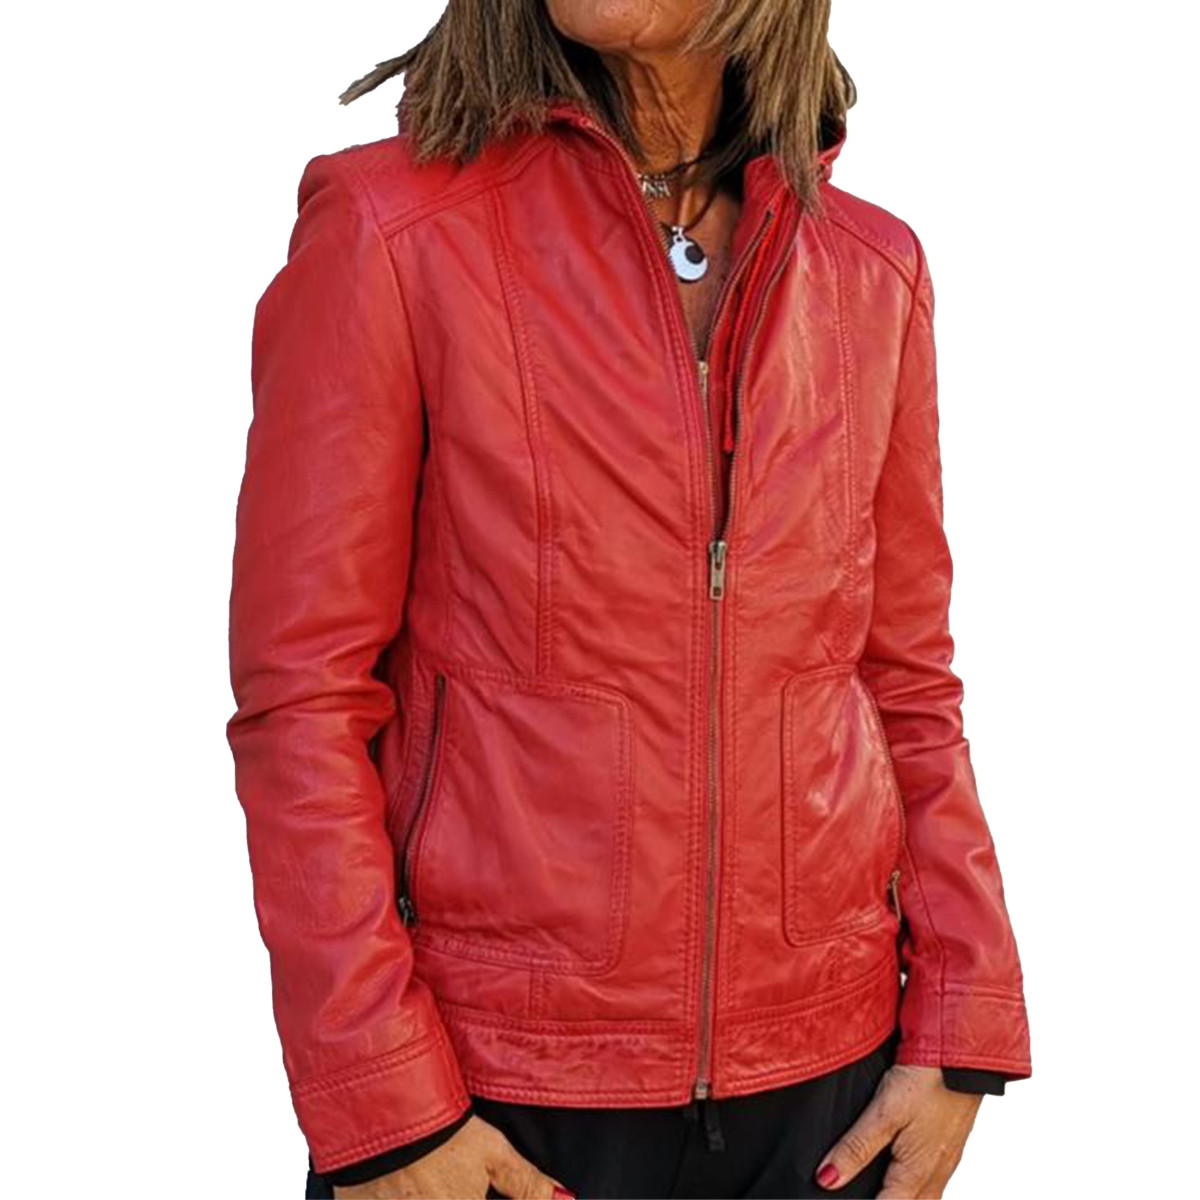 Red leather jacket 779 GEROME